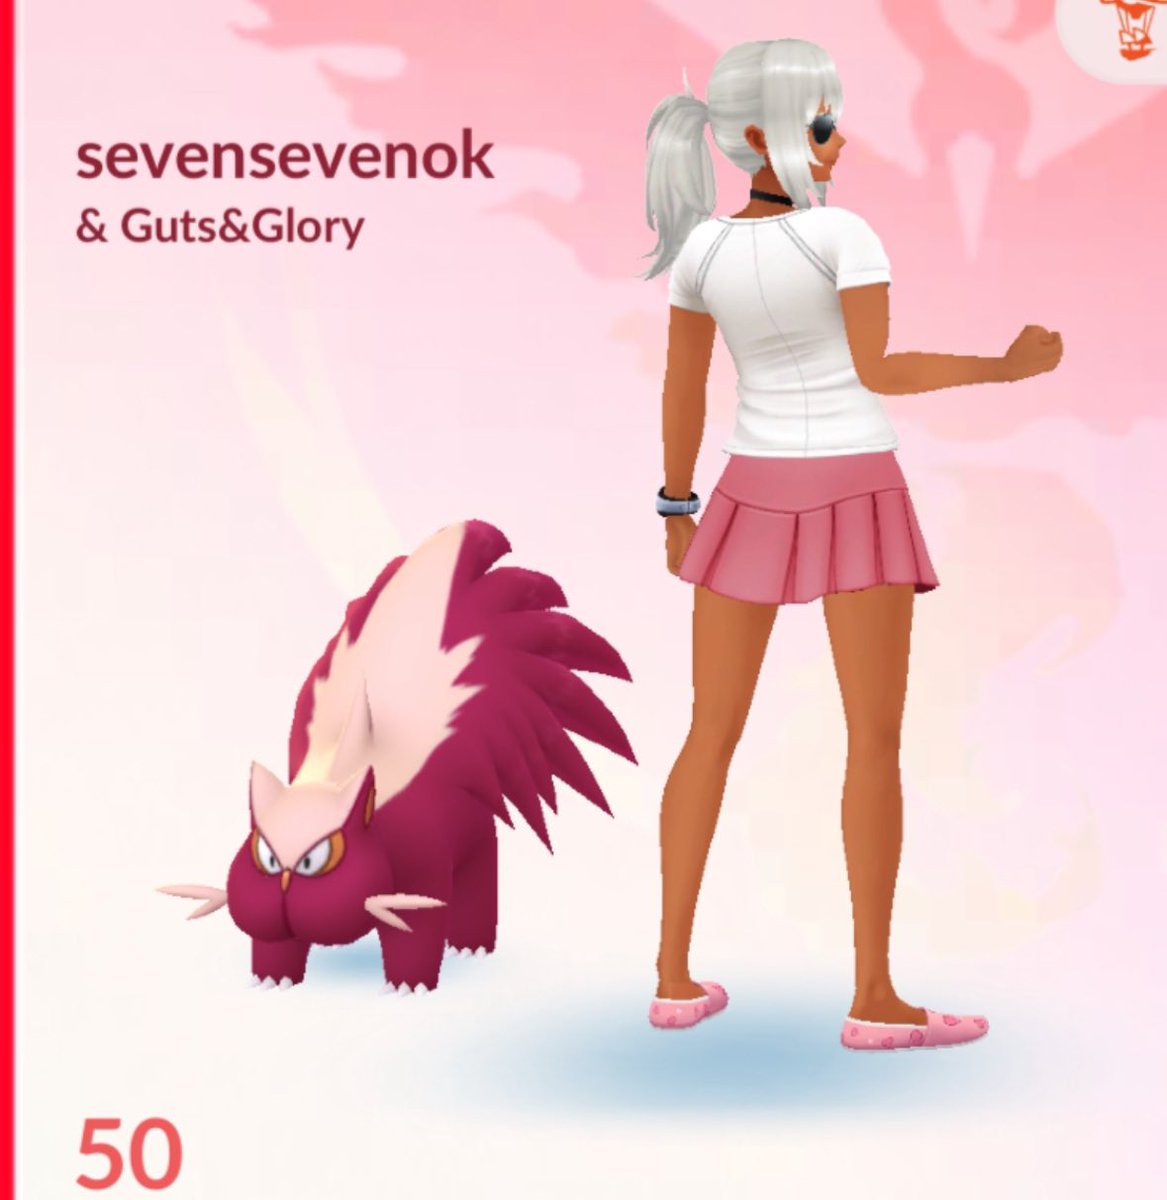 I do love Poison Pokemon.  As the days go on ... silence isn't great Niantic. We have invested and supported this game but no acknowledgment about the Avatars?  General acknowledgment ?  Why remove female body parts ?  Look at our pose, skin tone, hands, and shirt . This is not